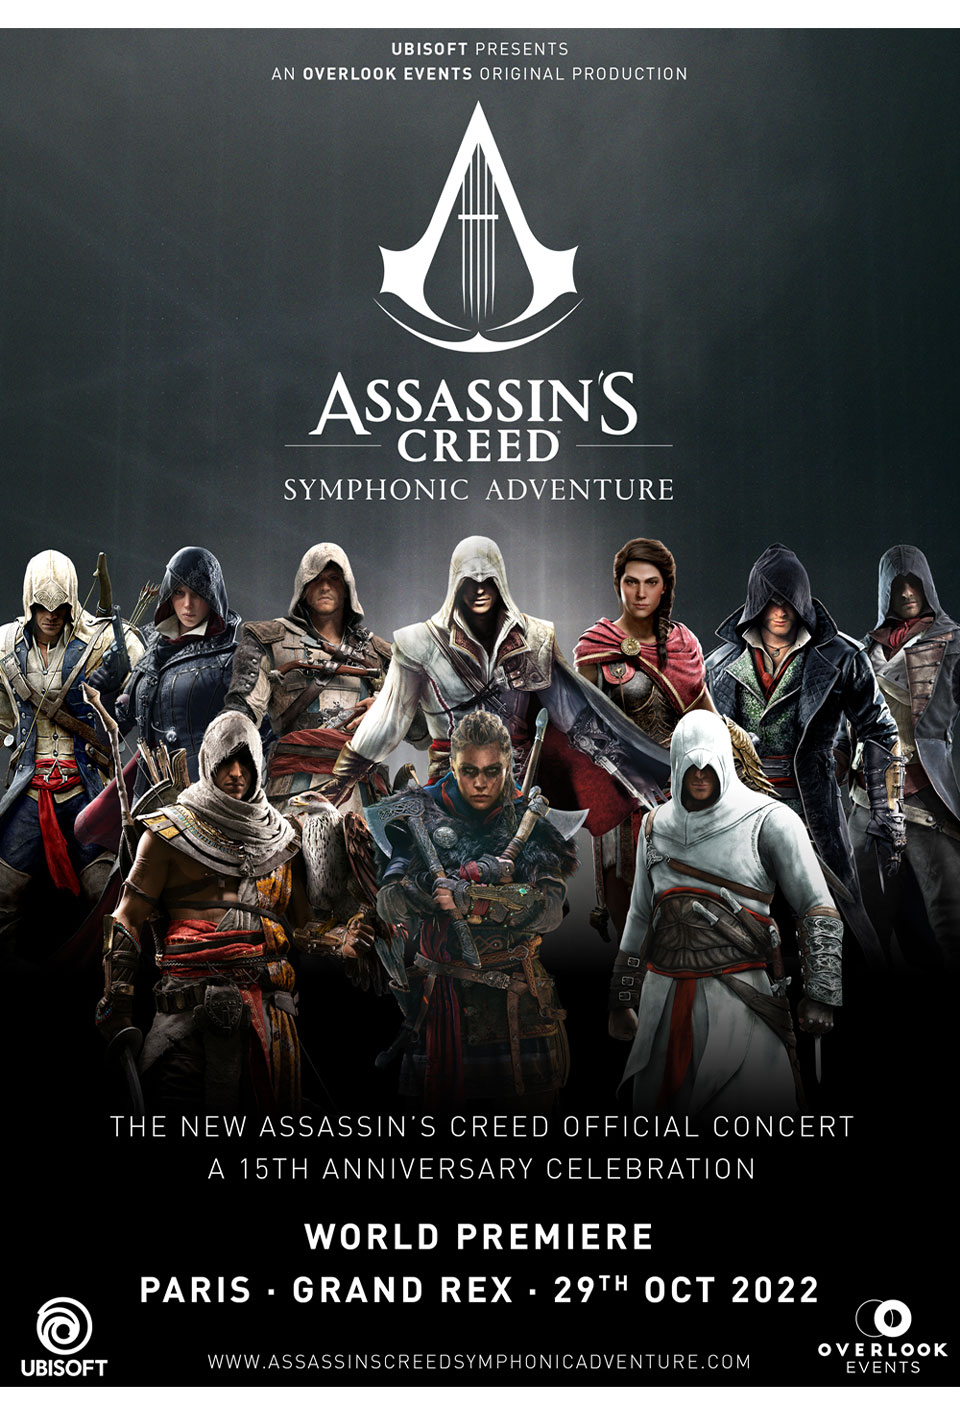 [UN] Assassin’s Creed Symphonic Adventure Live Concert Coming In 2022 - POSTER